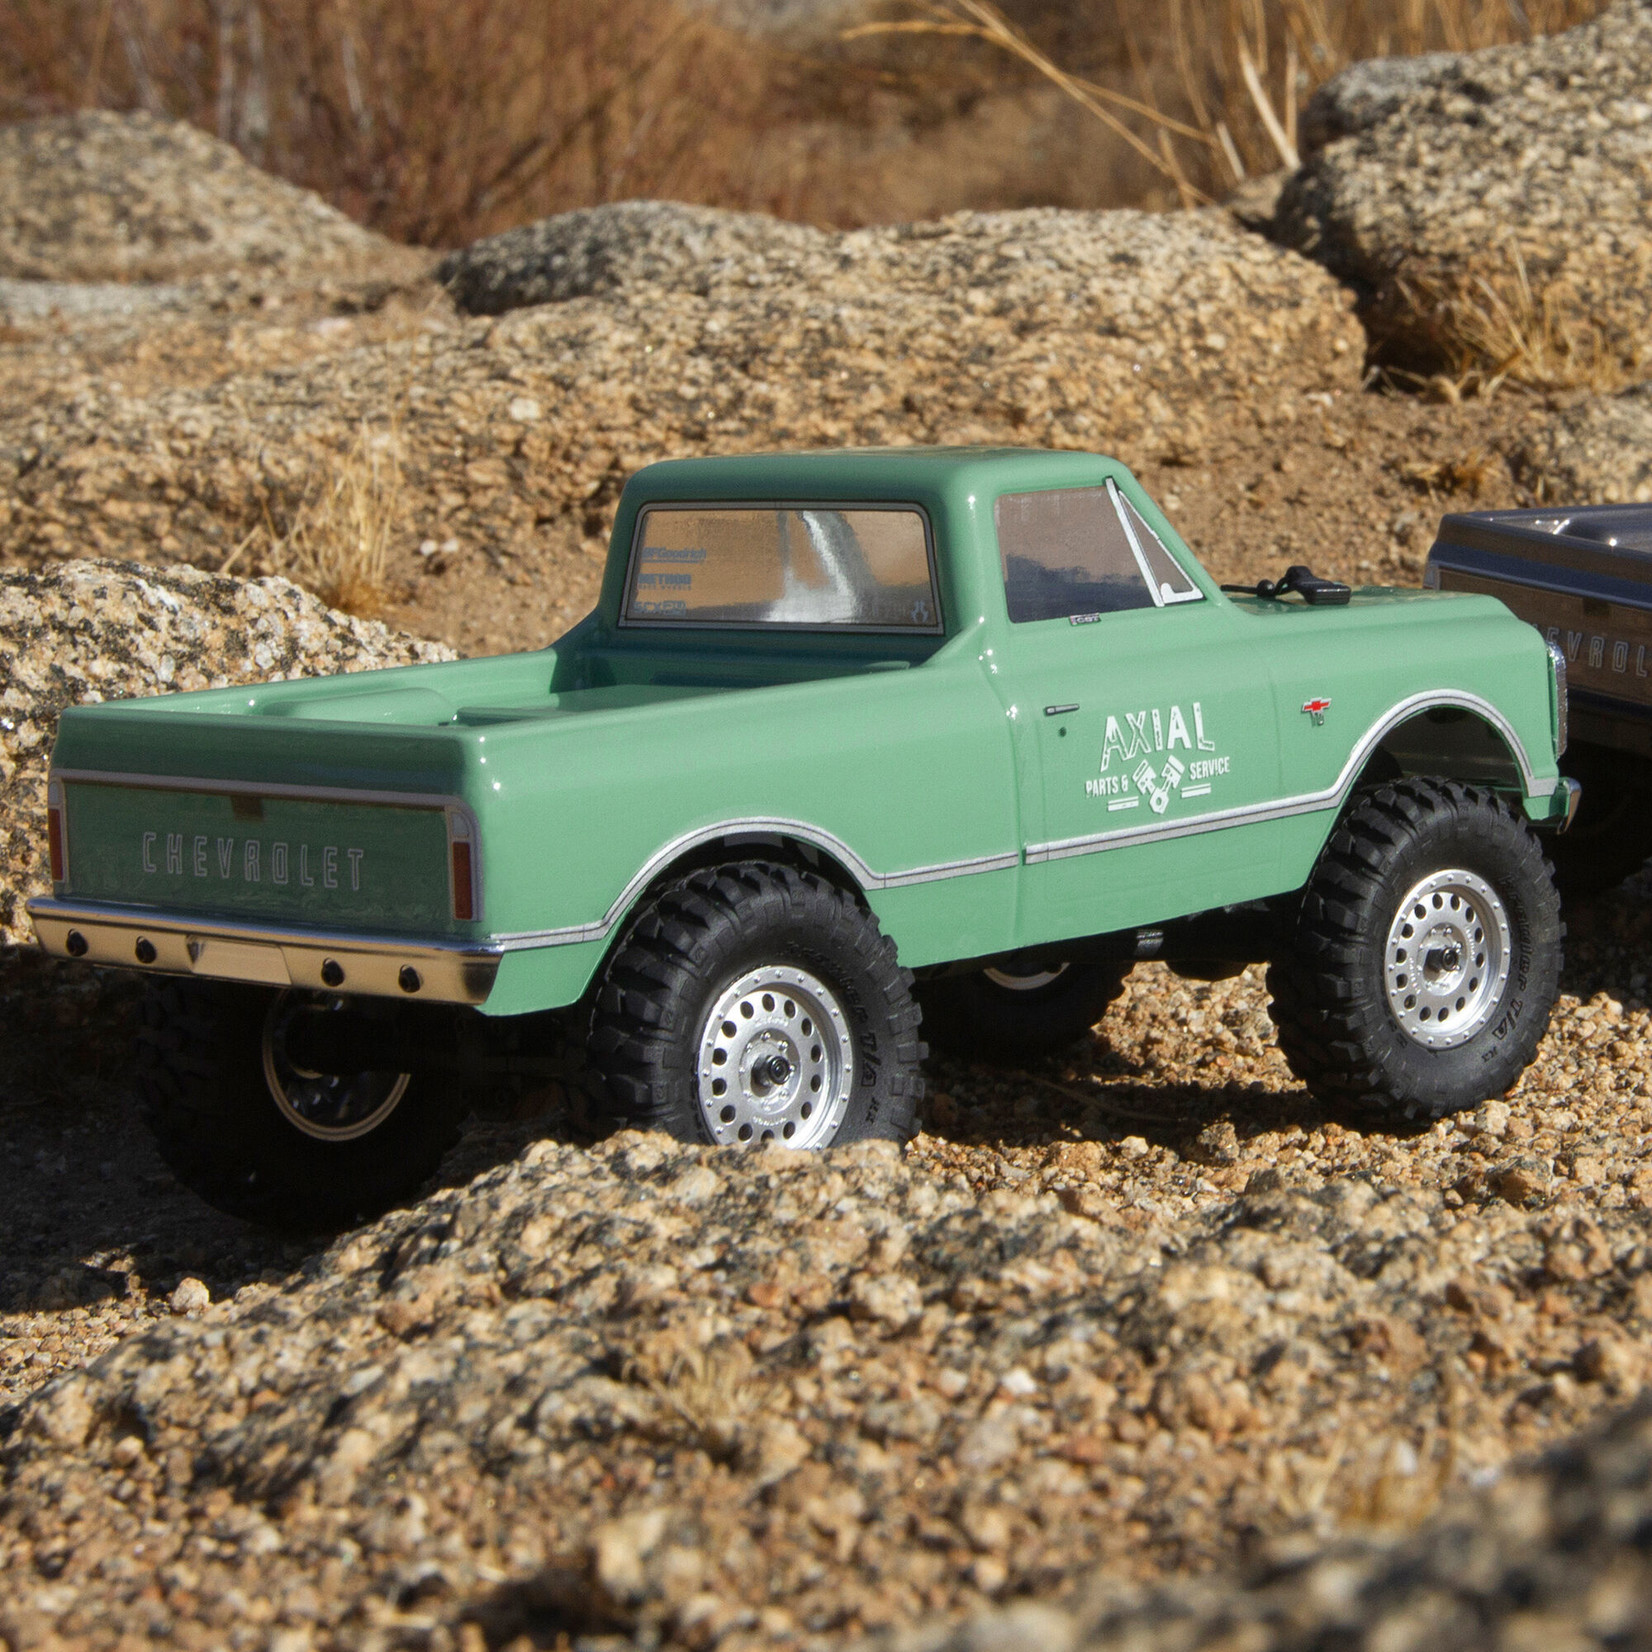 Axial 1/24 SCX24 1967 Chevrolet C10 4WD Truck Brushed RTR, Green